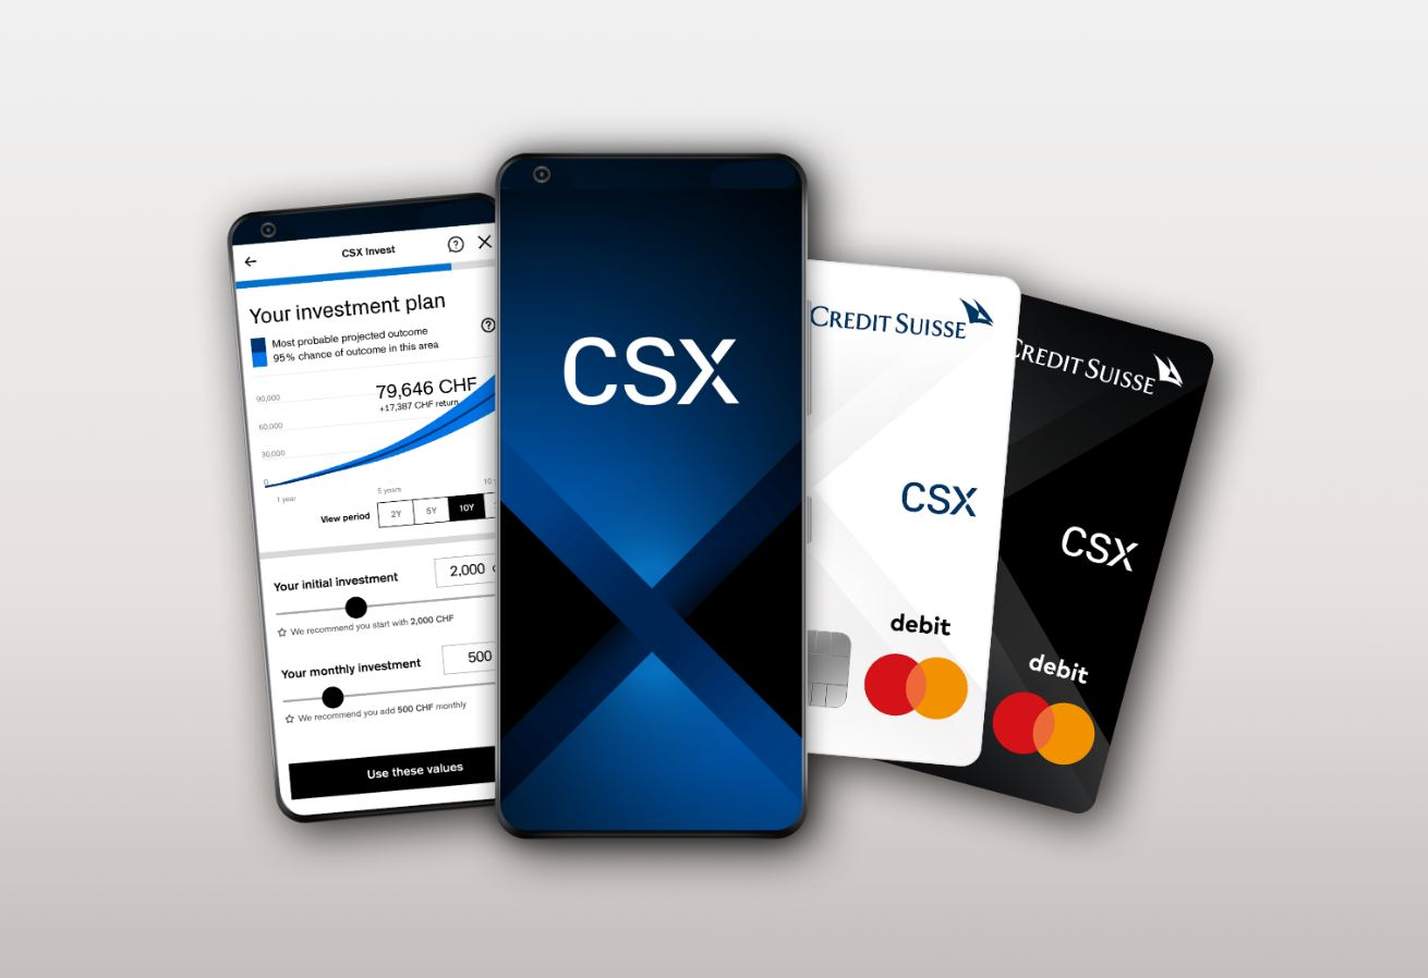 credit-suisse-to-launch-csx-new-app-based-banking-service